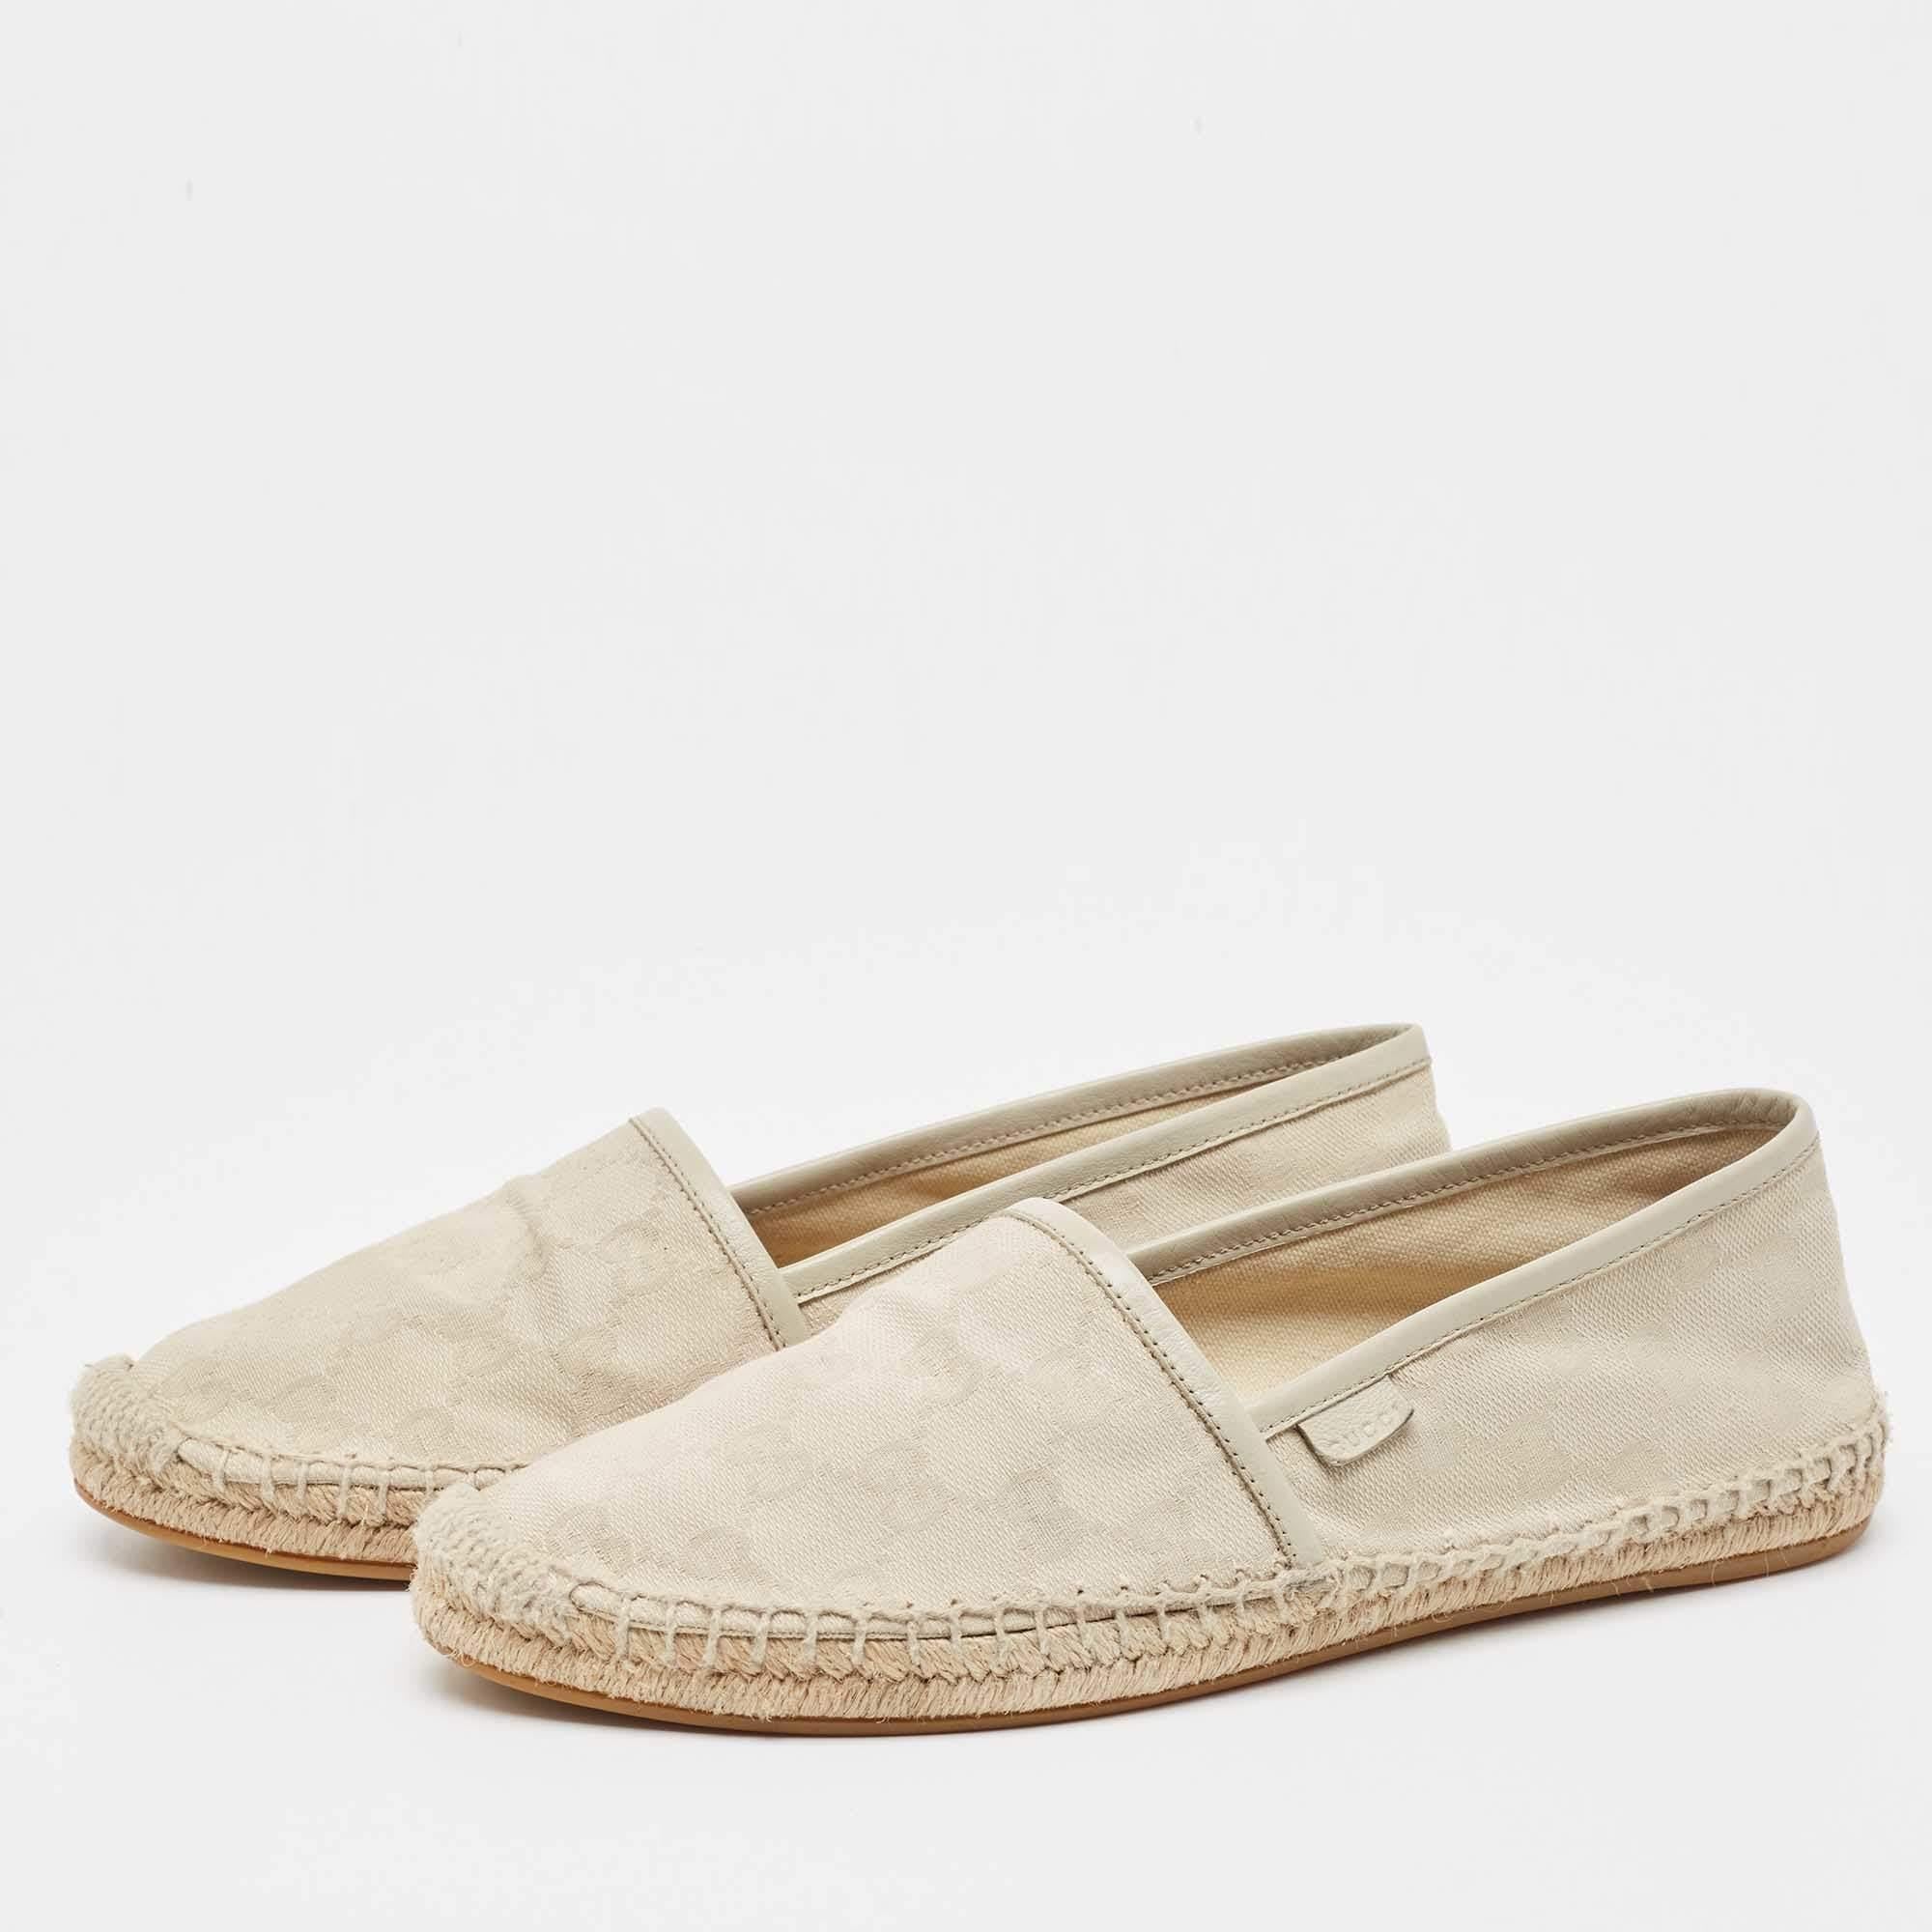 These designer espadrilles exude cool summer vibes while giving all the comfort to your feet. They bring along a well-built silhouette and the house's signature aesthetics. Wear them with anything: jeans, dresses, shorts.

